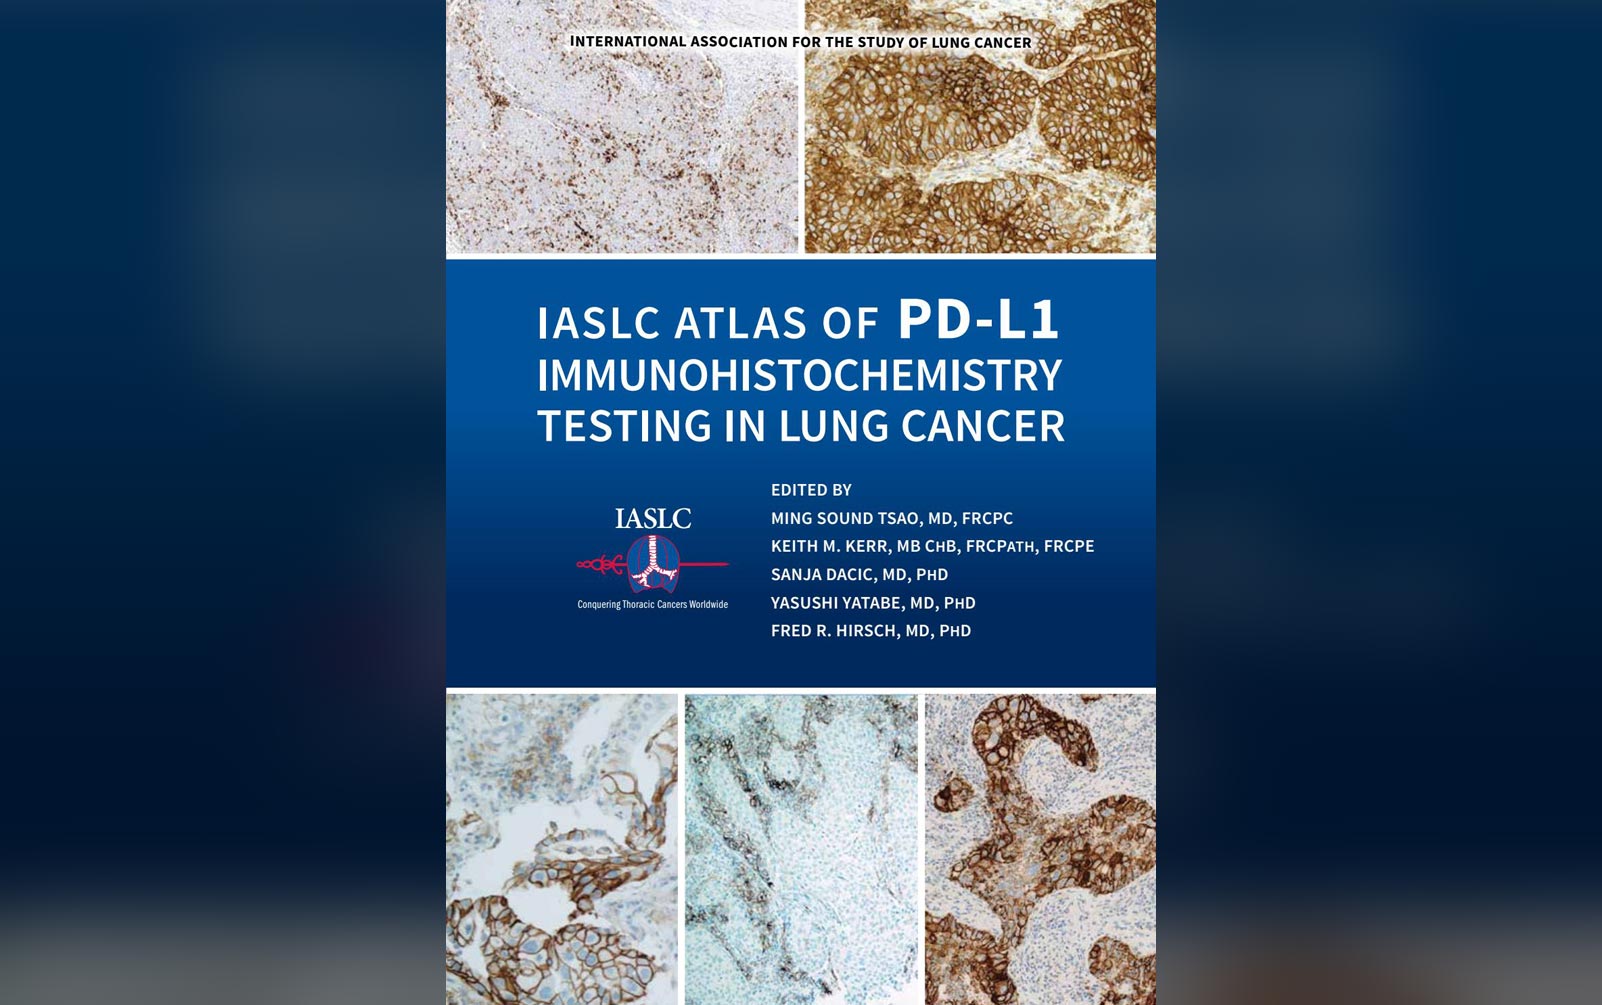 IASLC Atlas of PD-L1 Immunohistochemistry Testing in Lung Cancer